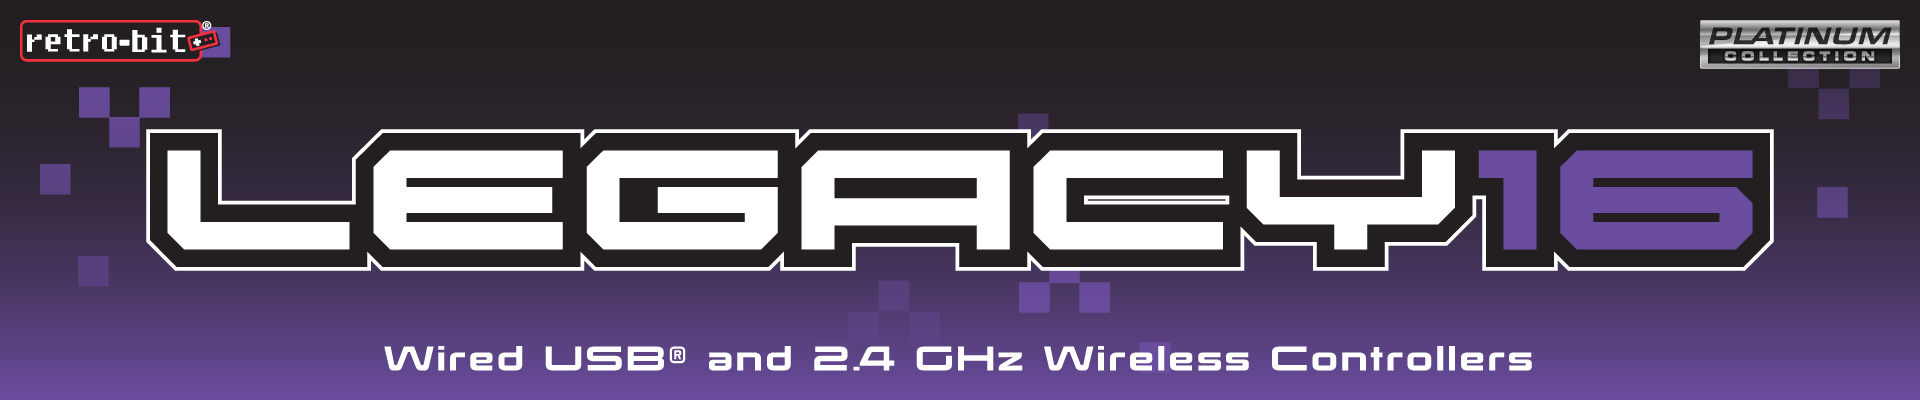 Legacy16 - Wired USB and 2.4 GHz Wireless